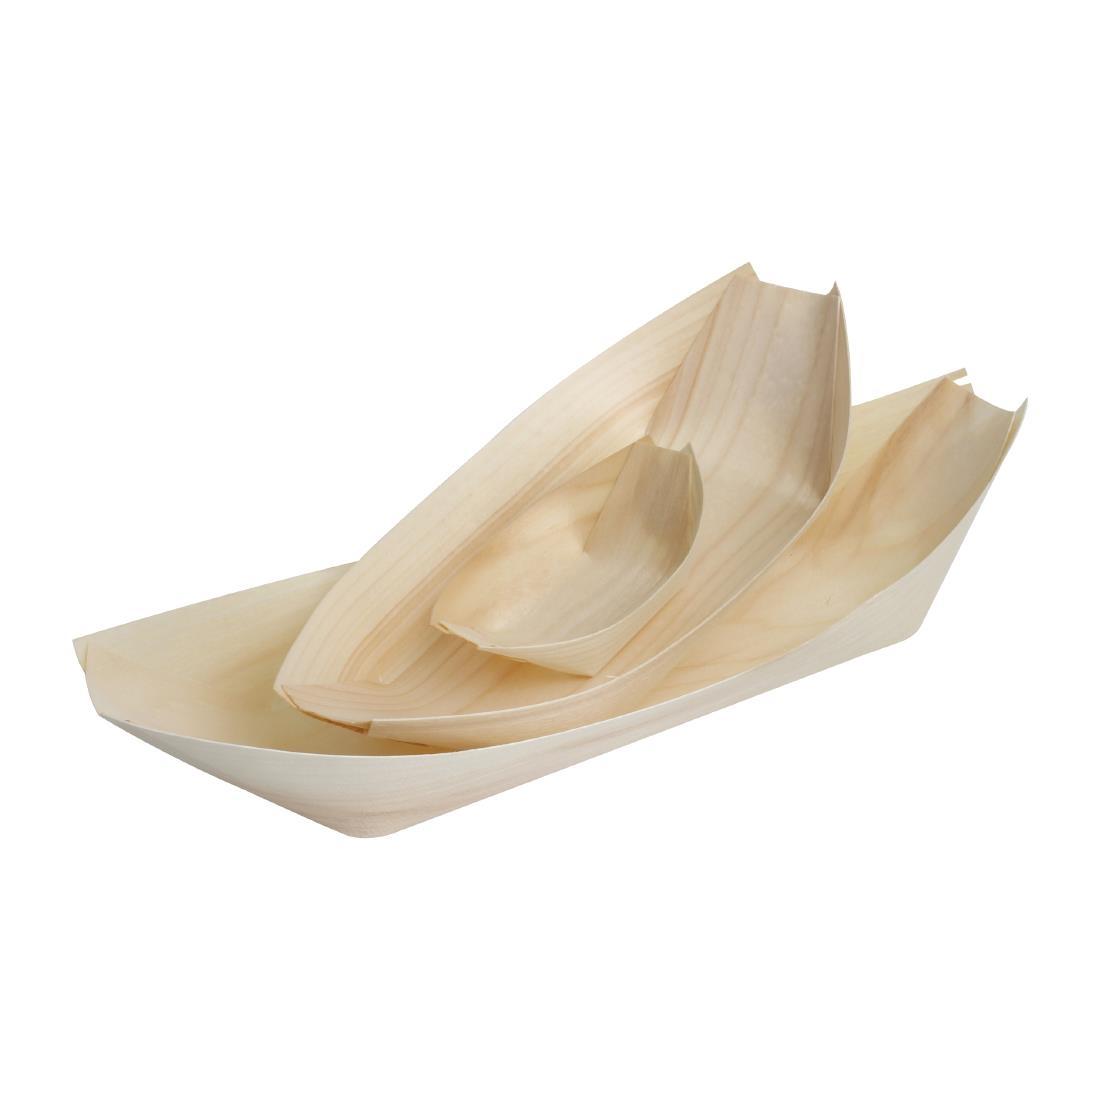 Fiesta Compostable Wooden Sushi Boats Large 250mm (Pack of 100) - DK386  - 4